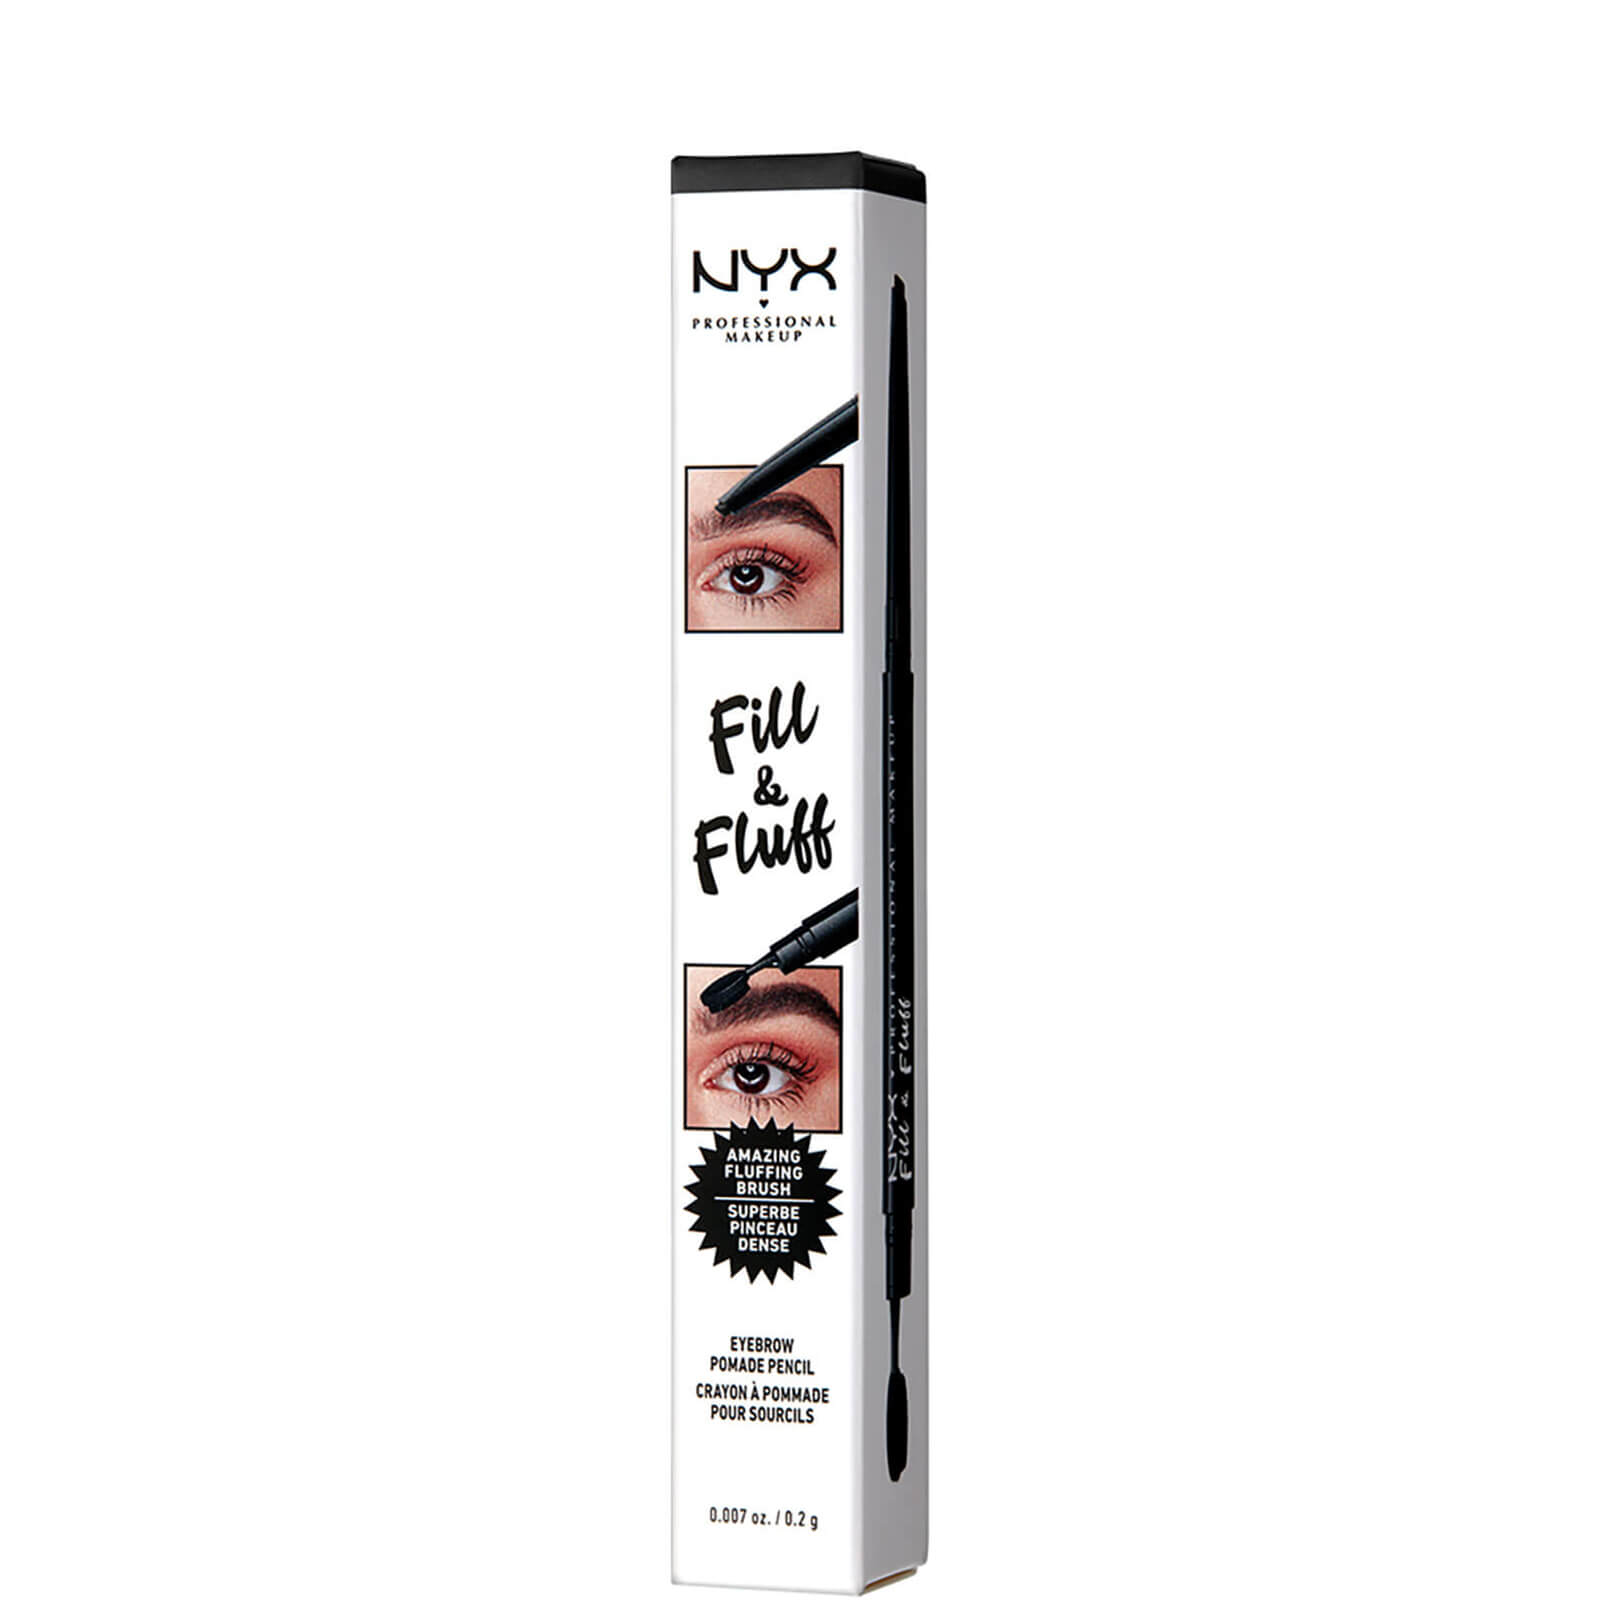 Image of NYX Professional Makeup Fill and Fluff Eyebrow Pomade Pencil 0.2g (Various Shades) - Black